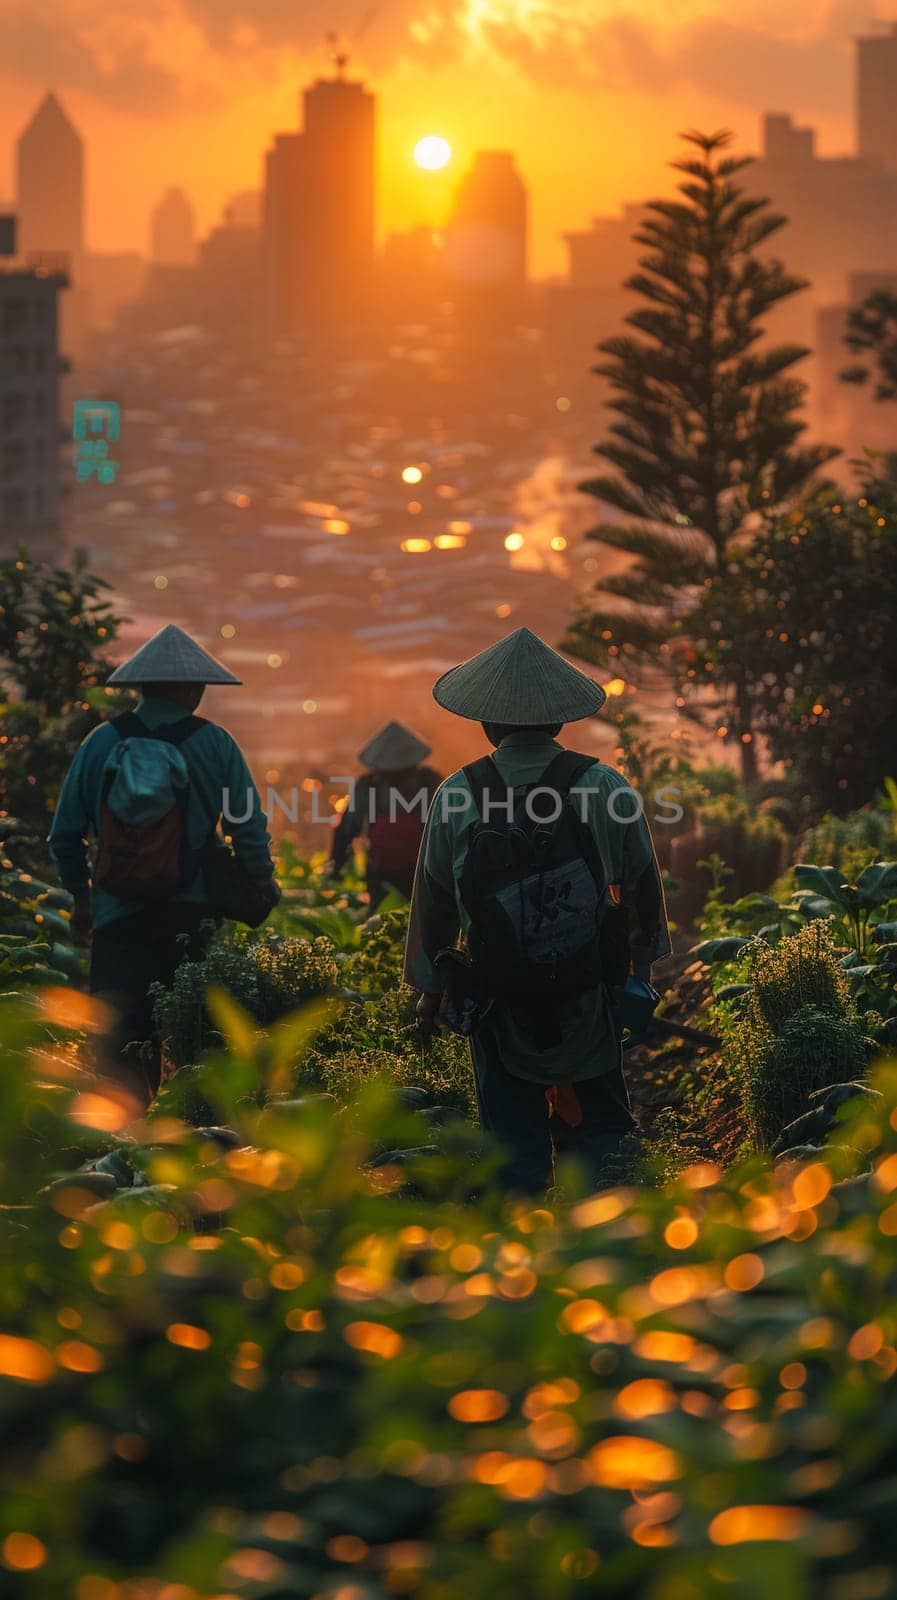 Farmers Tending to Crops in a Fertile Field with Soft Sunrise The gentle blur of workers and land suggests the timeless rhythm of agriculture. Urban Skyline Overlooking Bustling Financial District.